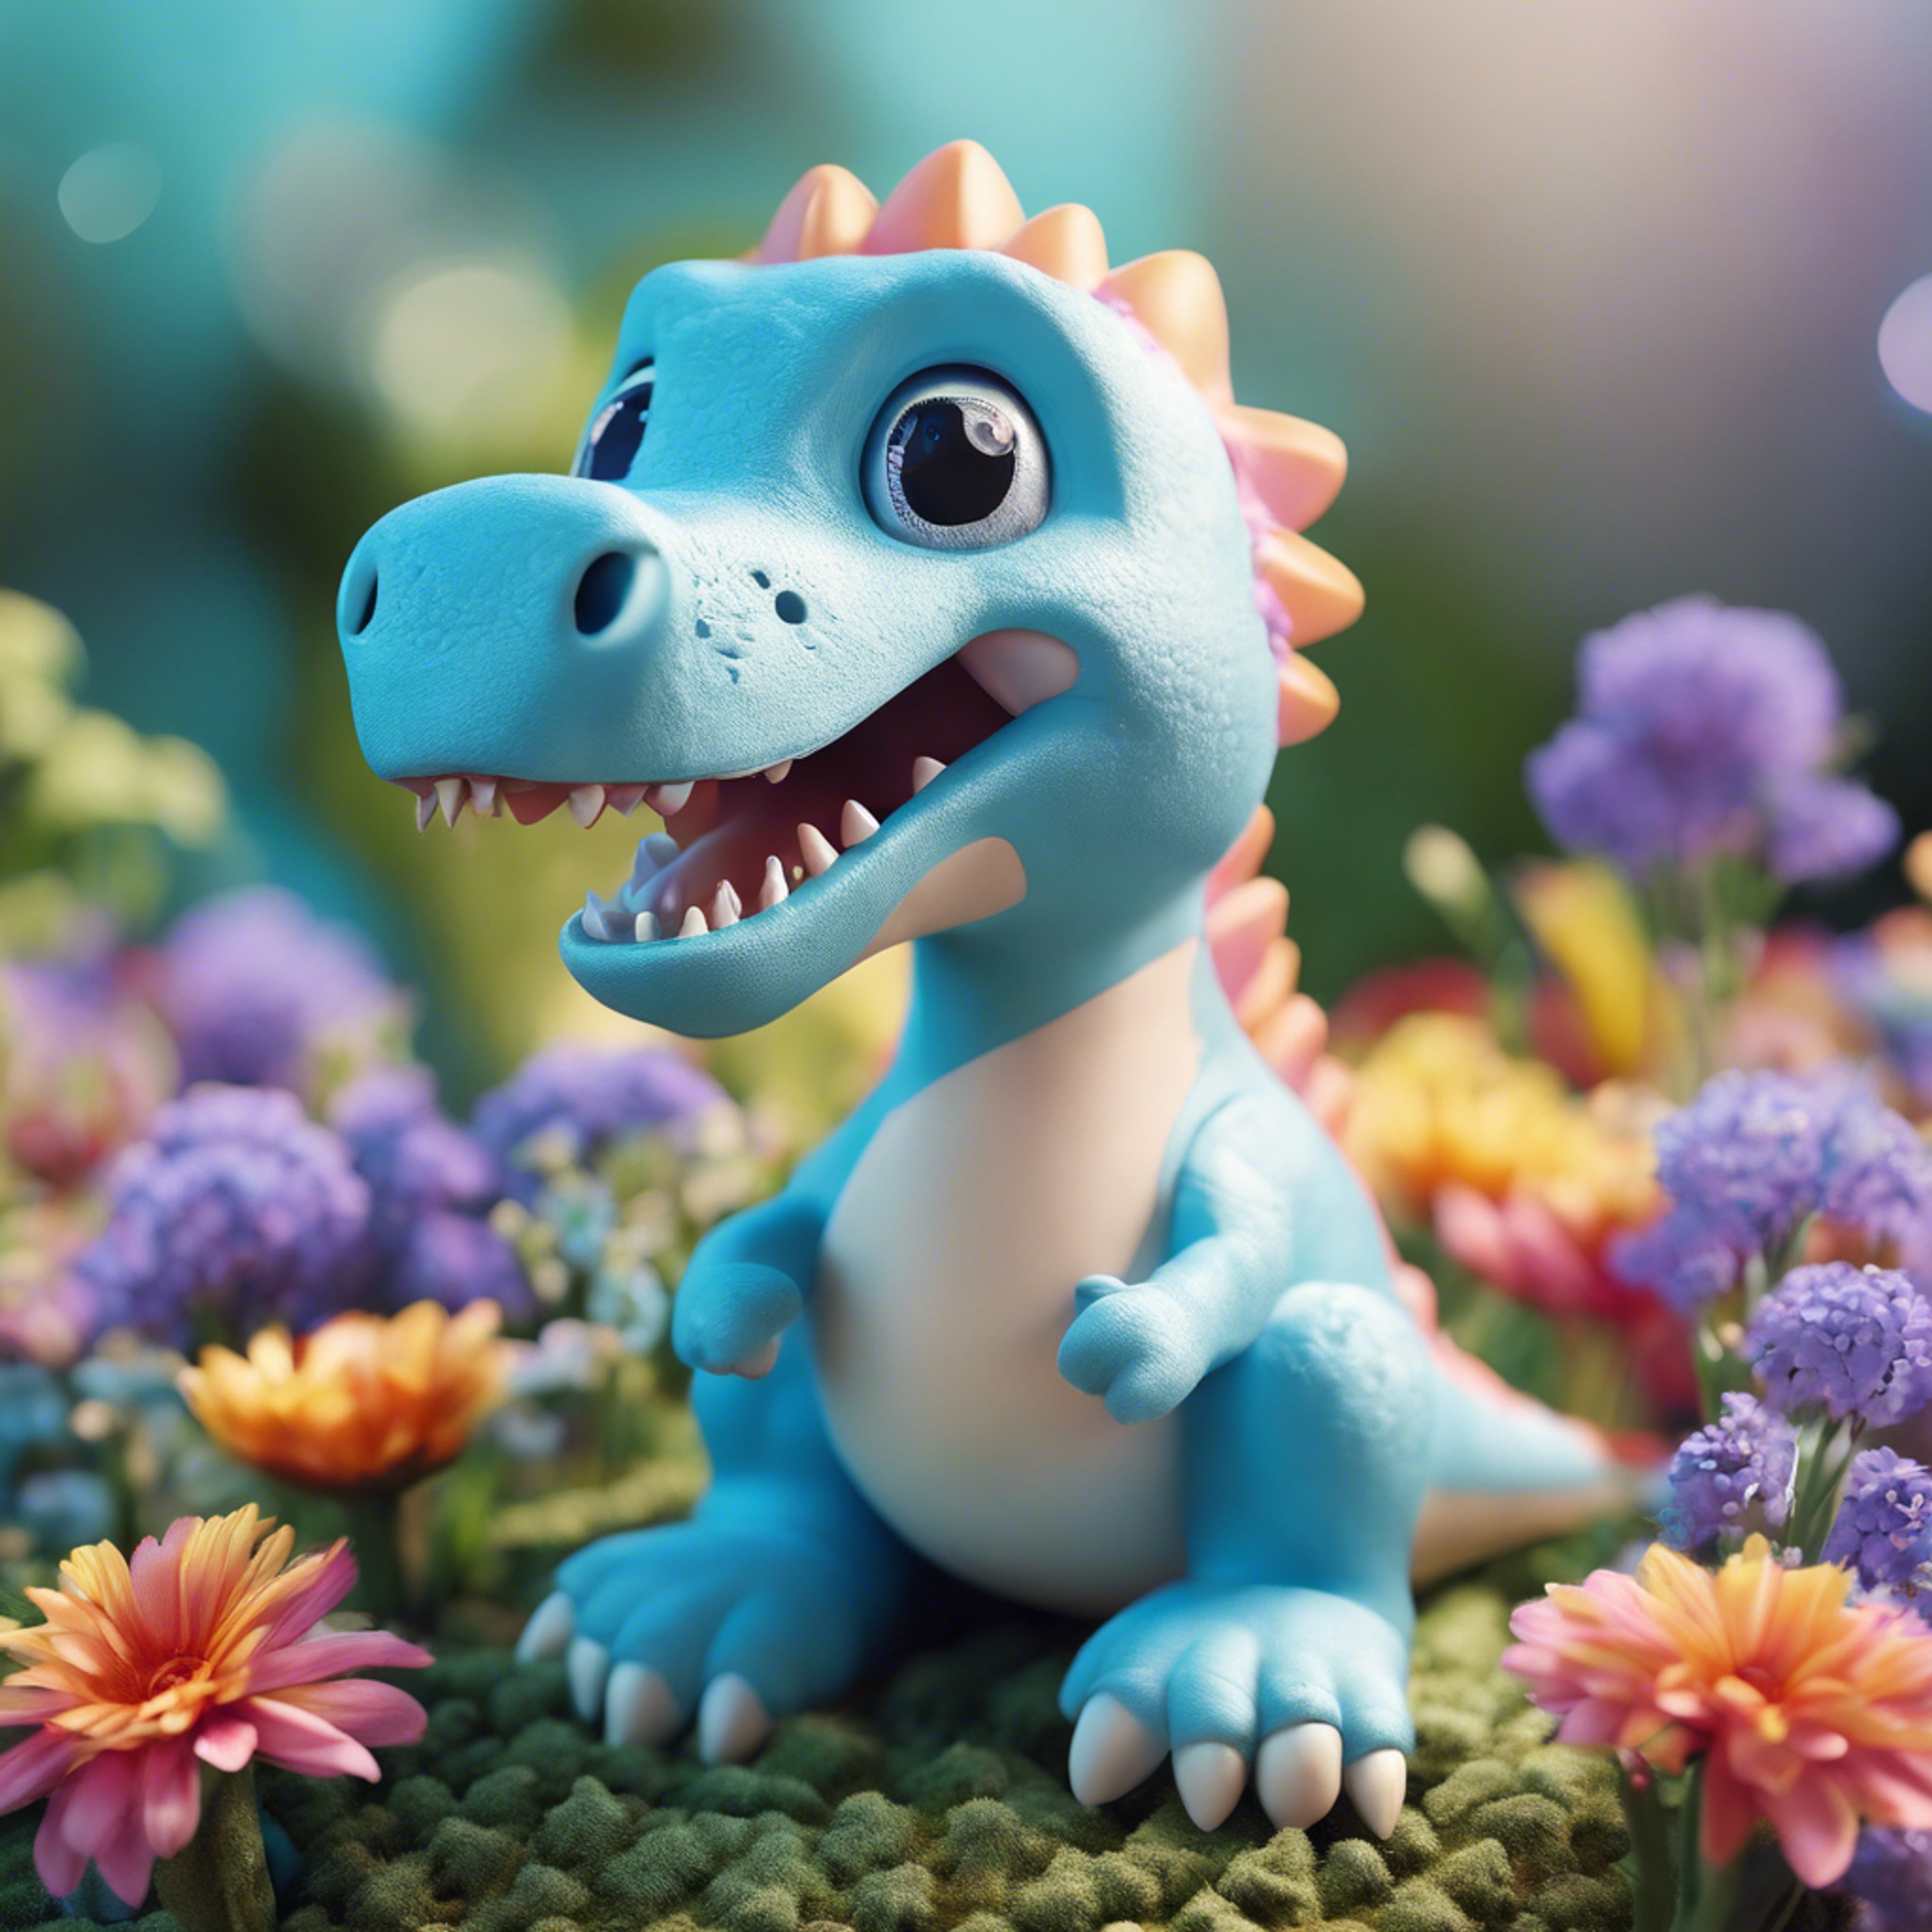 A cute light blue dinosaur with a kawaii expression, surrounded by brightly colored flowers. Taustakuva[445e6142c59b4fa2886e]